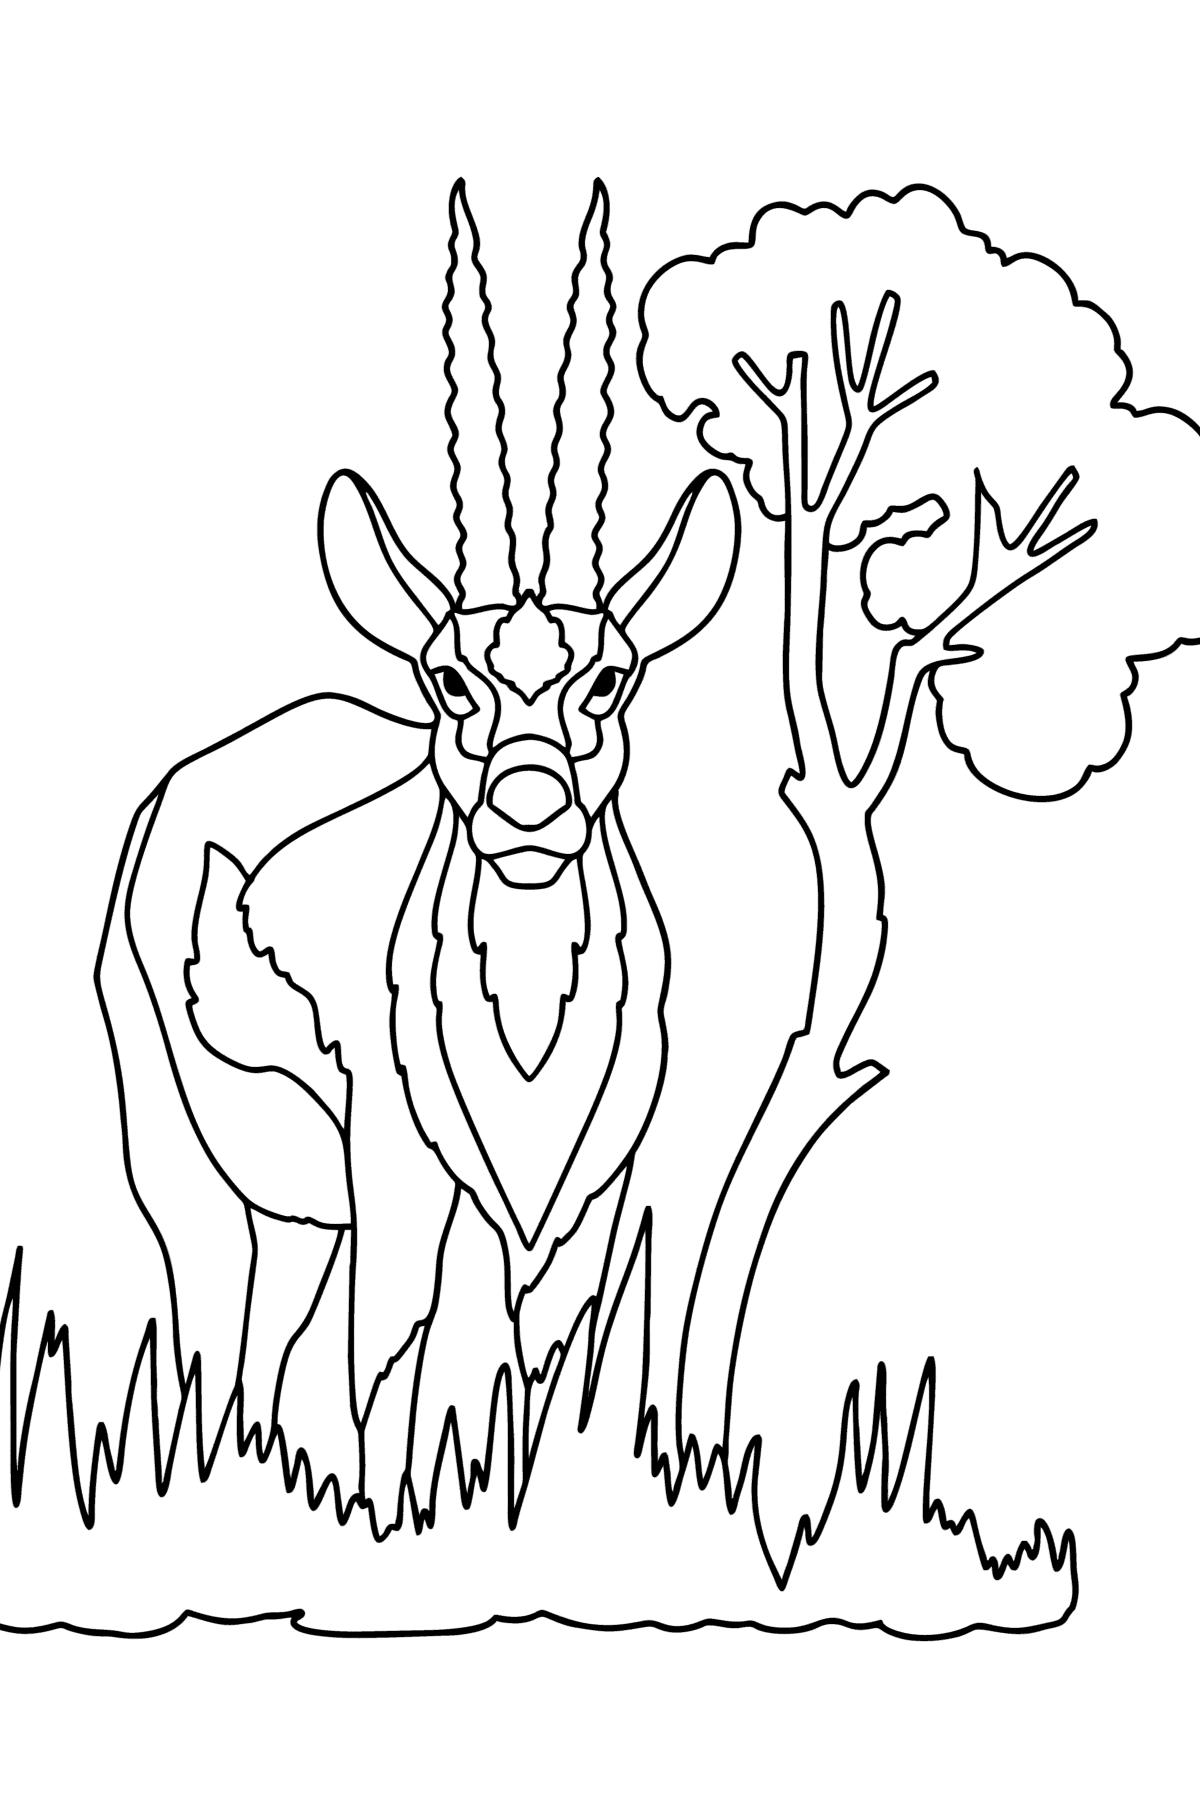 Thompson's gazelle сoloring page - Coloring Pages for Kids